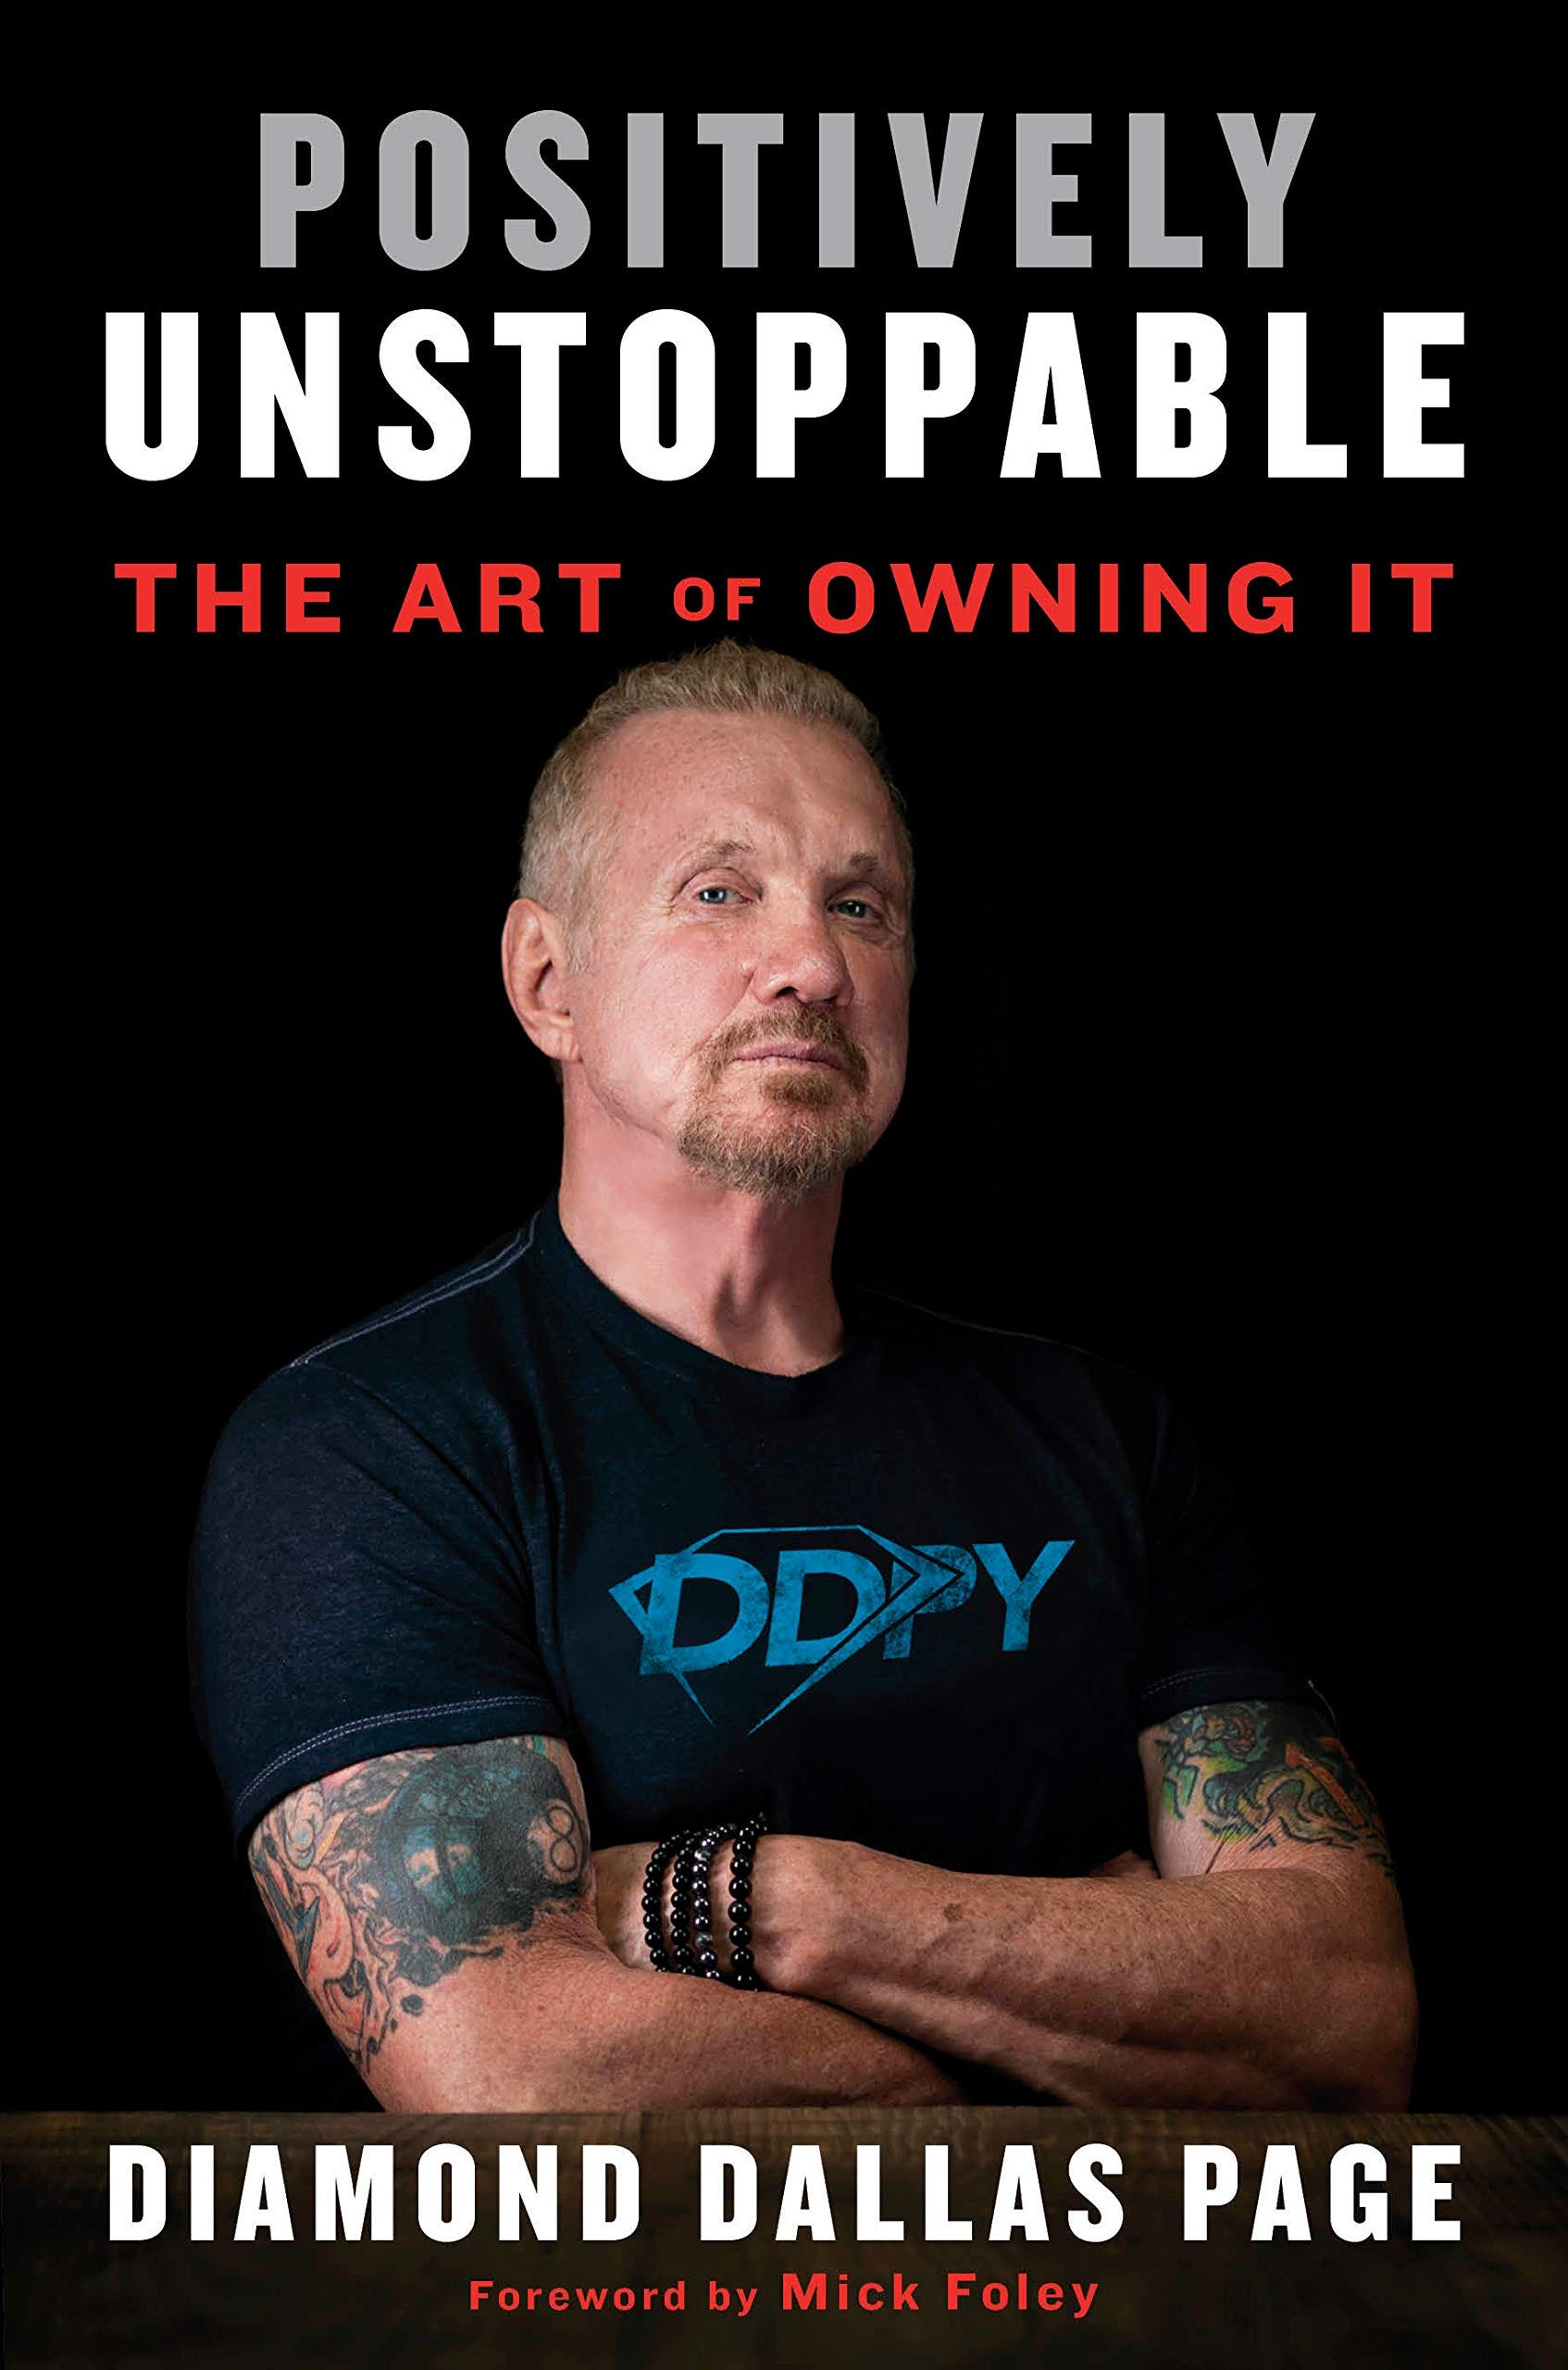 An in-depth analysis of DDP Yoga - by Darreck W. Kirby